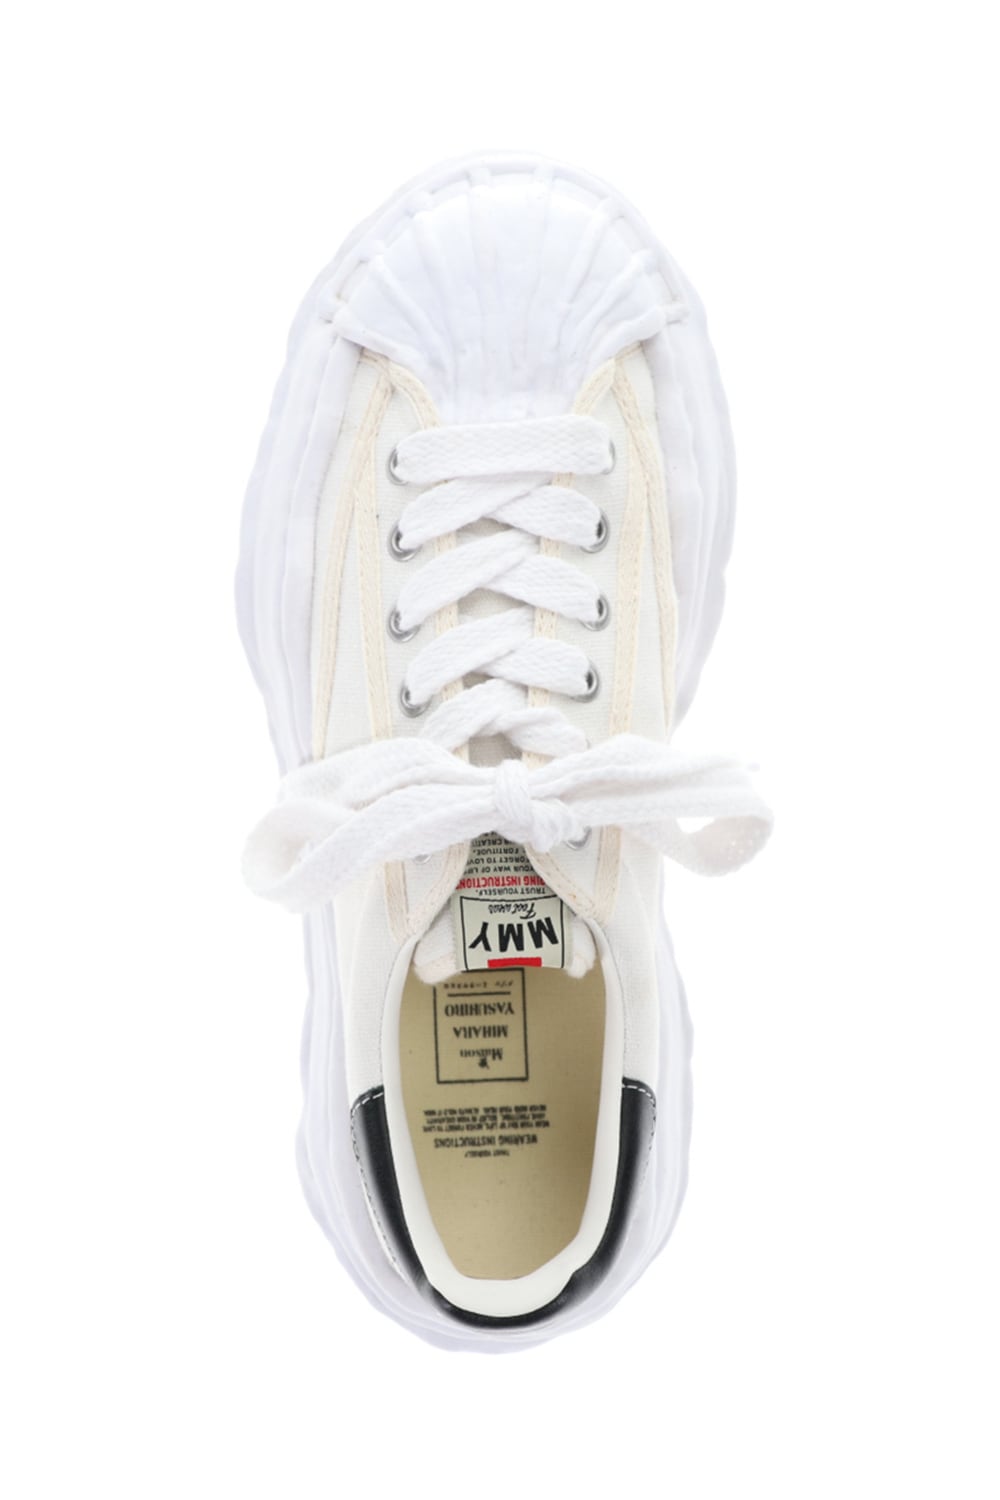 -BLAKEY Low- Original STC sole canvas Low-cut sneakers White Delivery November